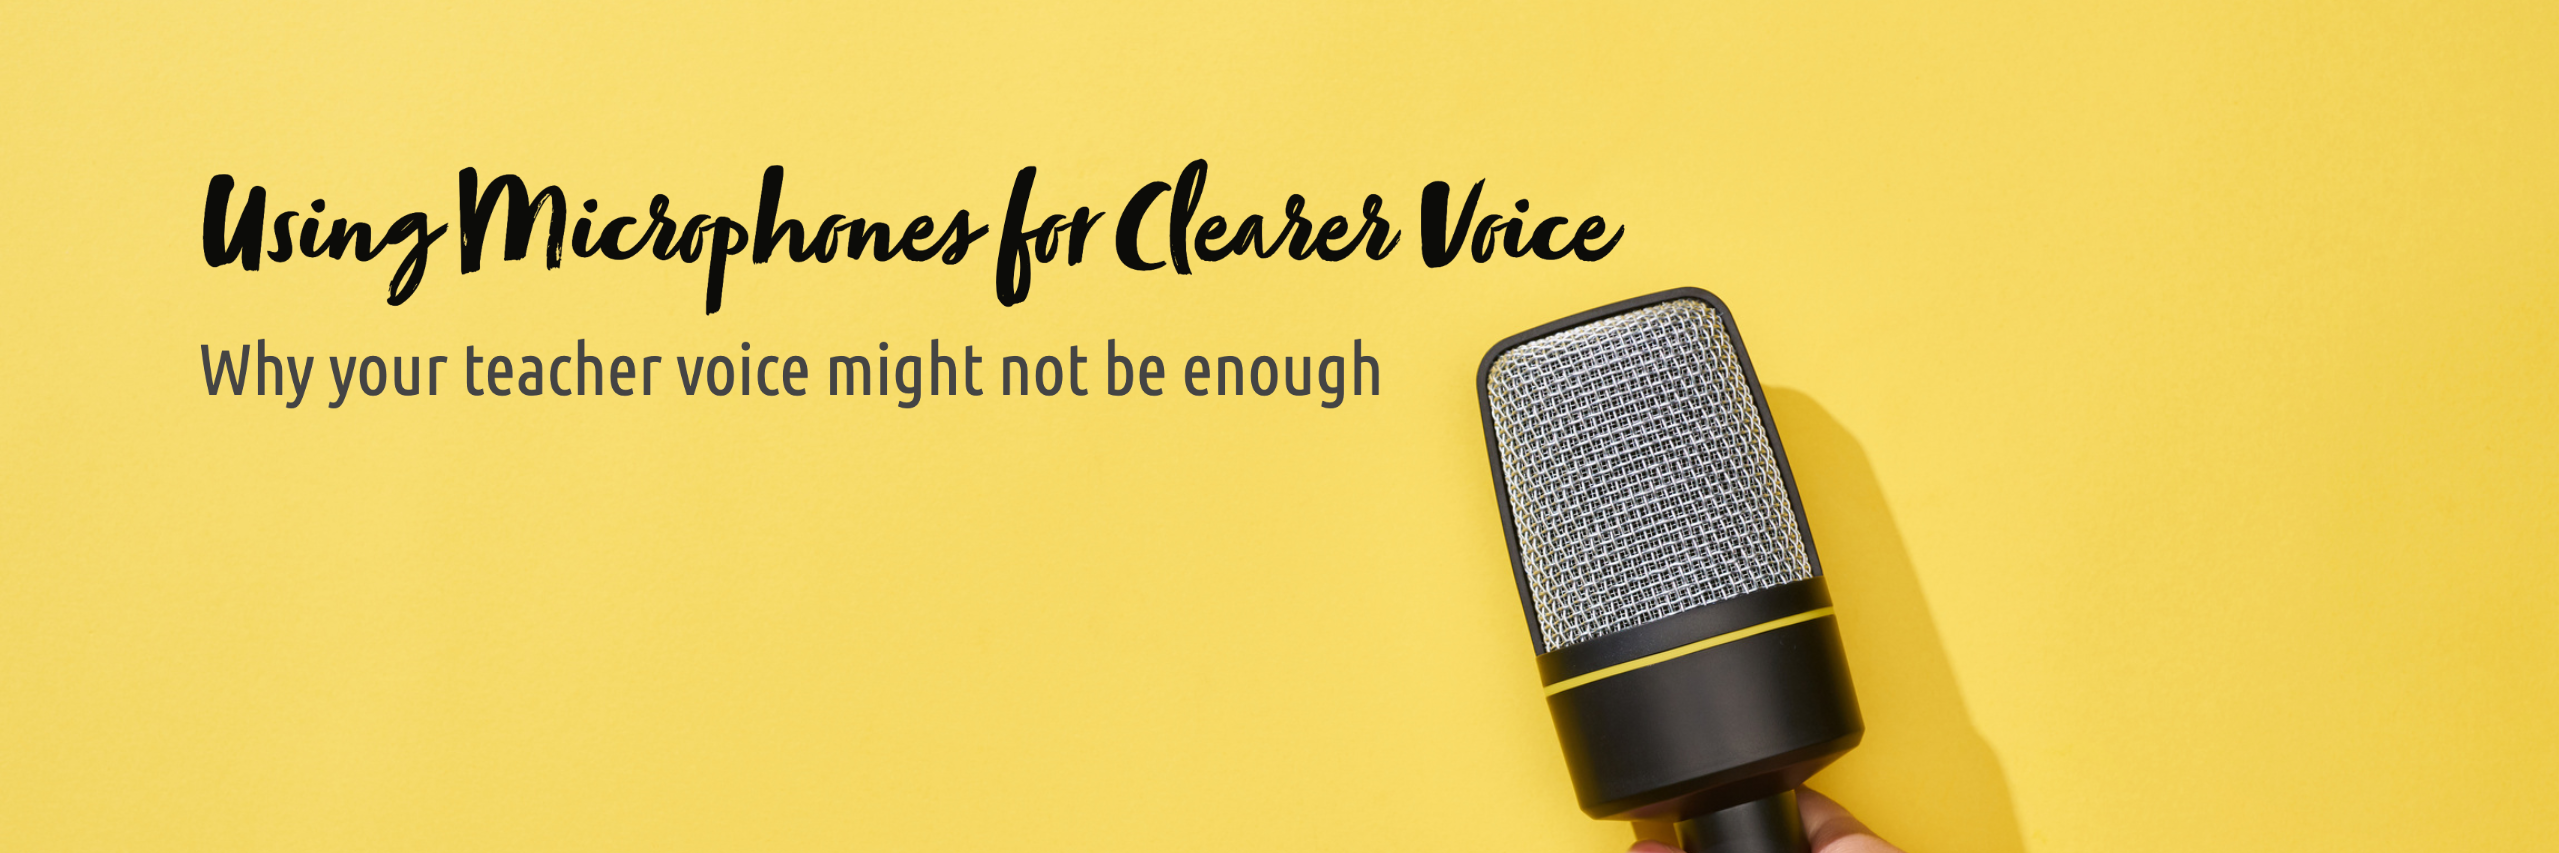 Using Microphones for Clearer Voice